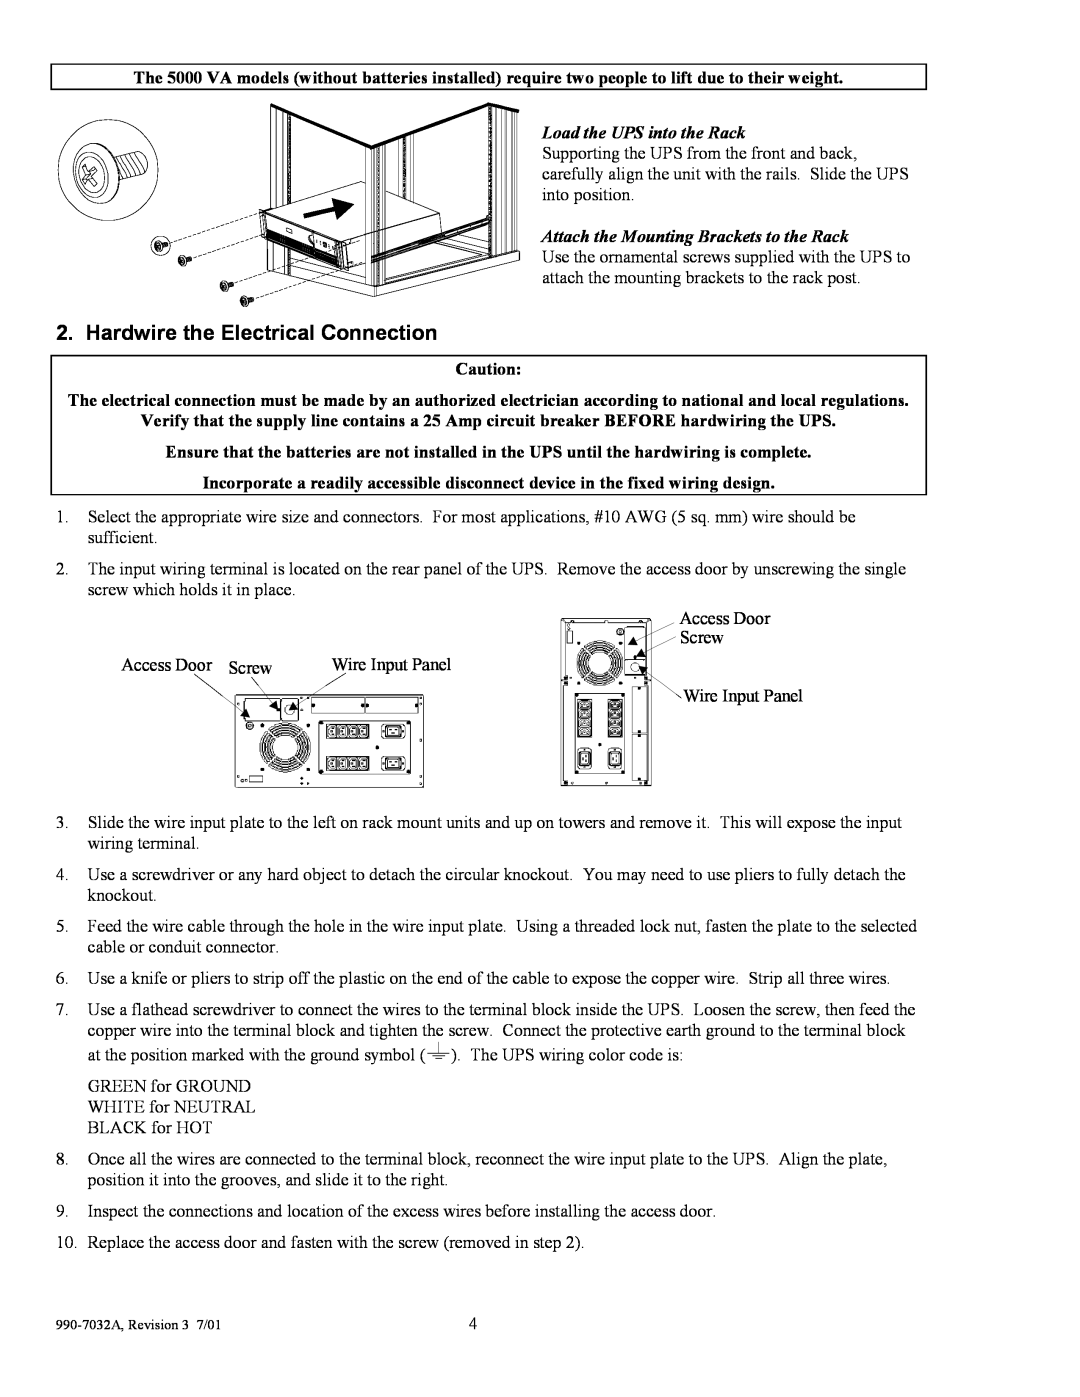 American Power Conversion 5000I user manual Hardwire the Electrical Connection, Load the UPS into the Rack 